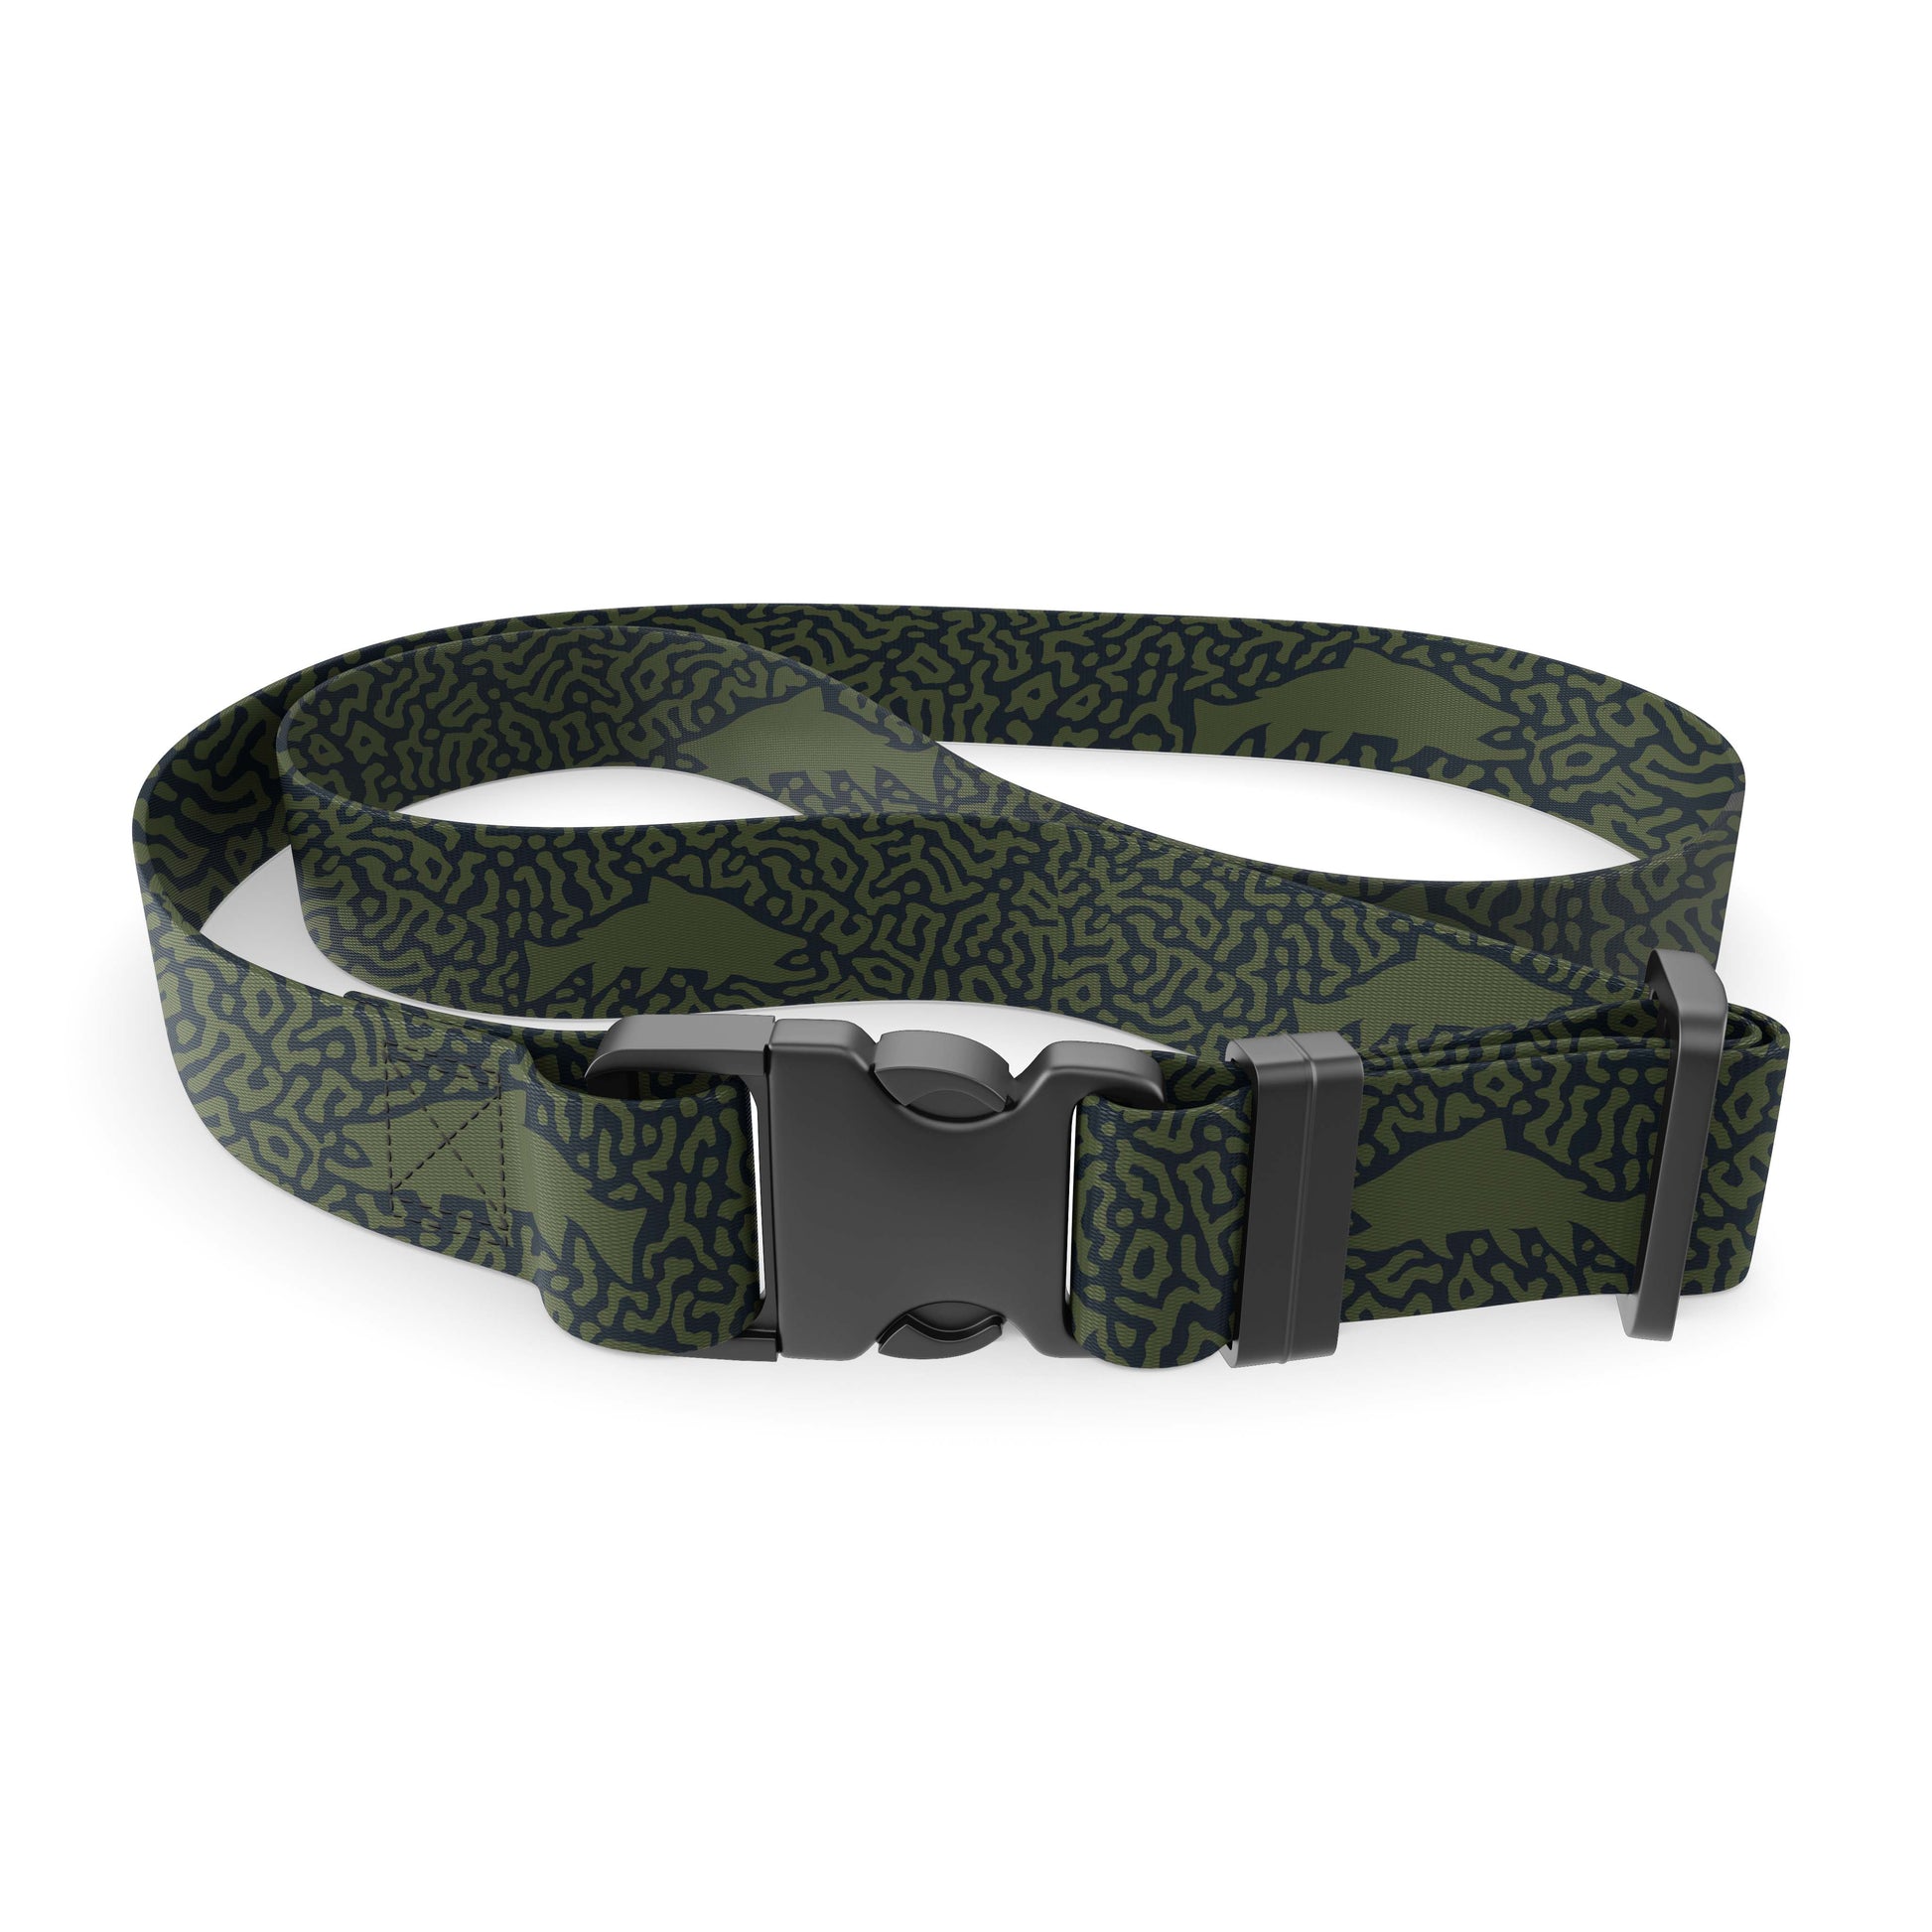 Navy nylon webbing belt with green fish pattern and with plastic buckle